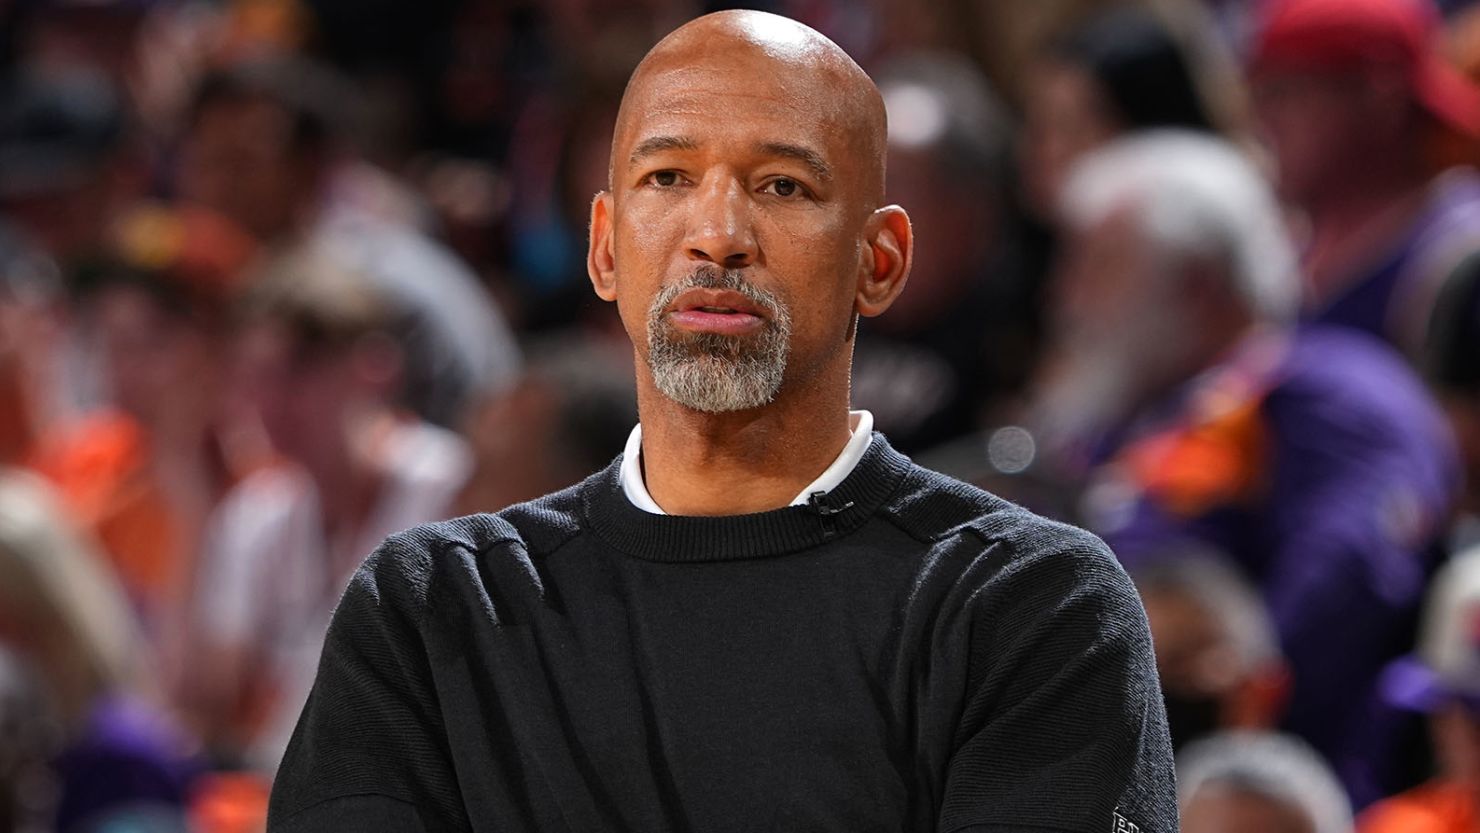 The Detroit Pistons have agreed to a record deal with Monty Williams to be the franchise's new head coach, per reports.